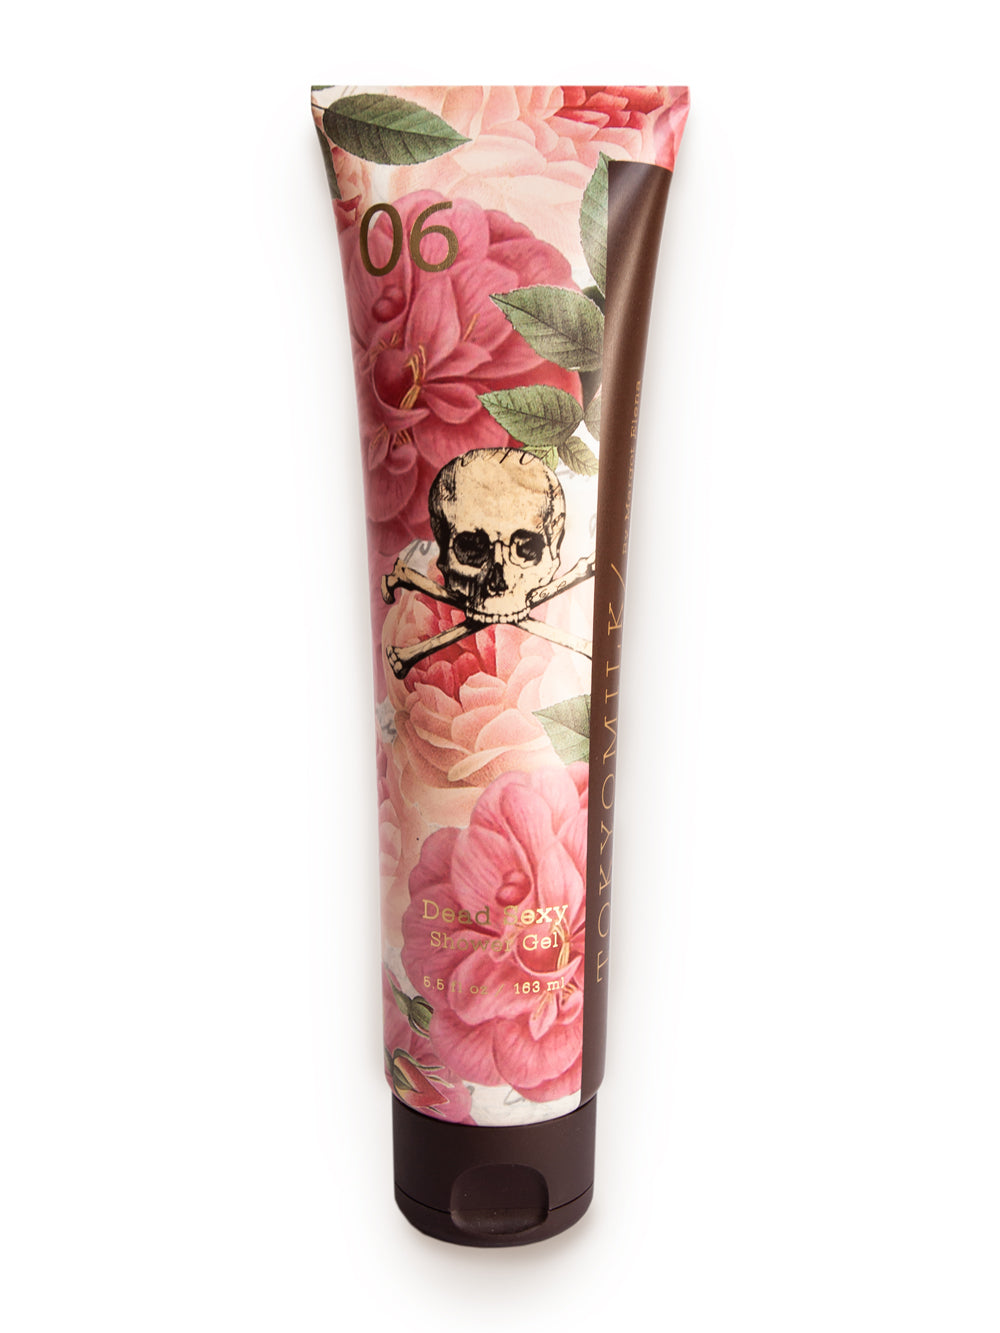 A tube of TokyoMilk Dead Sexy Perfumed Shower Gel by Margot Elena, with a floral and skull design, featuring pink roses and black text, offering luxurious moisture, isolated on a white background.